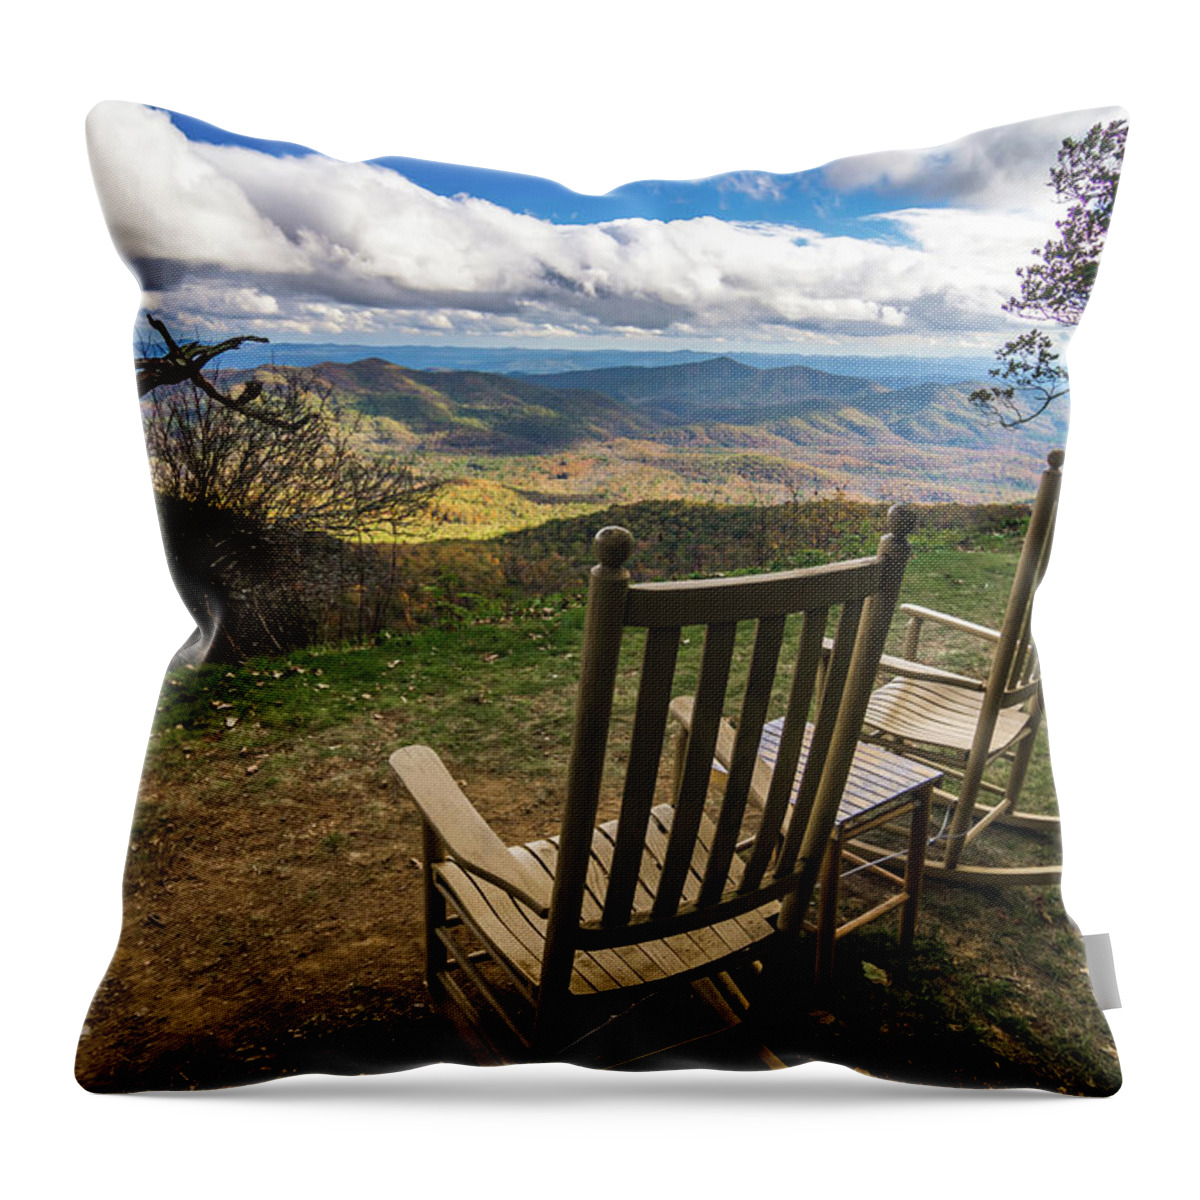 Blue Throw Pillow featuring the photograph Mountain Views At Sunset From Lawn Chair #4 by Alex Grichenko